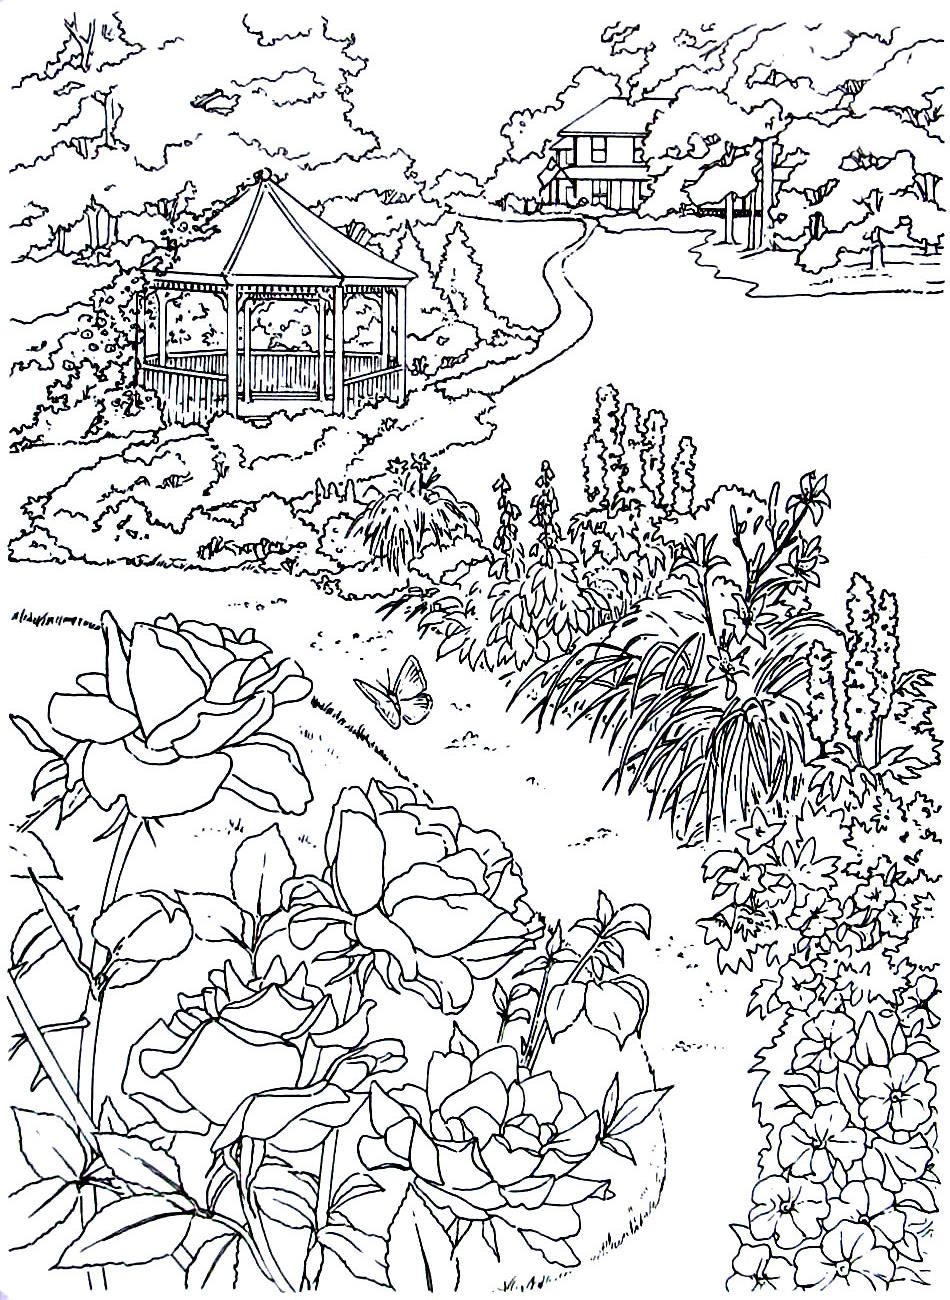 Farm house with gazebo - living in the country coloring book page | Coloring  pages, Coloring books, Coloring book pages